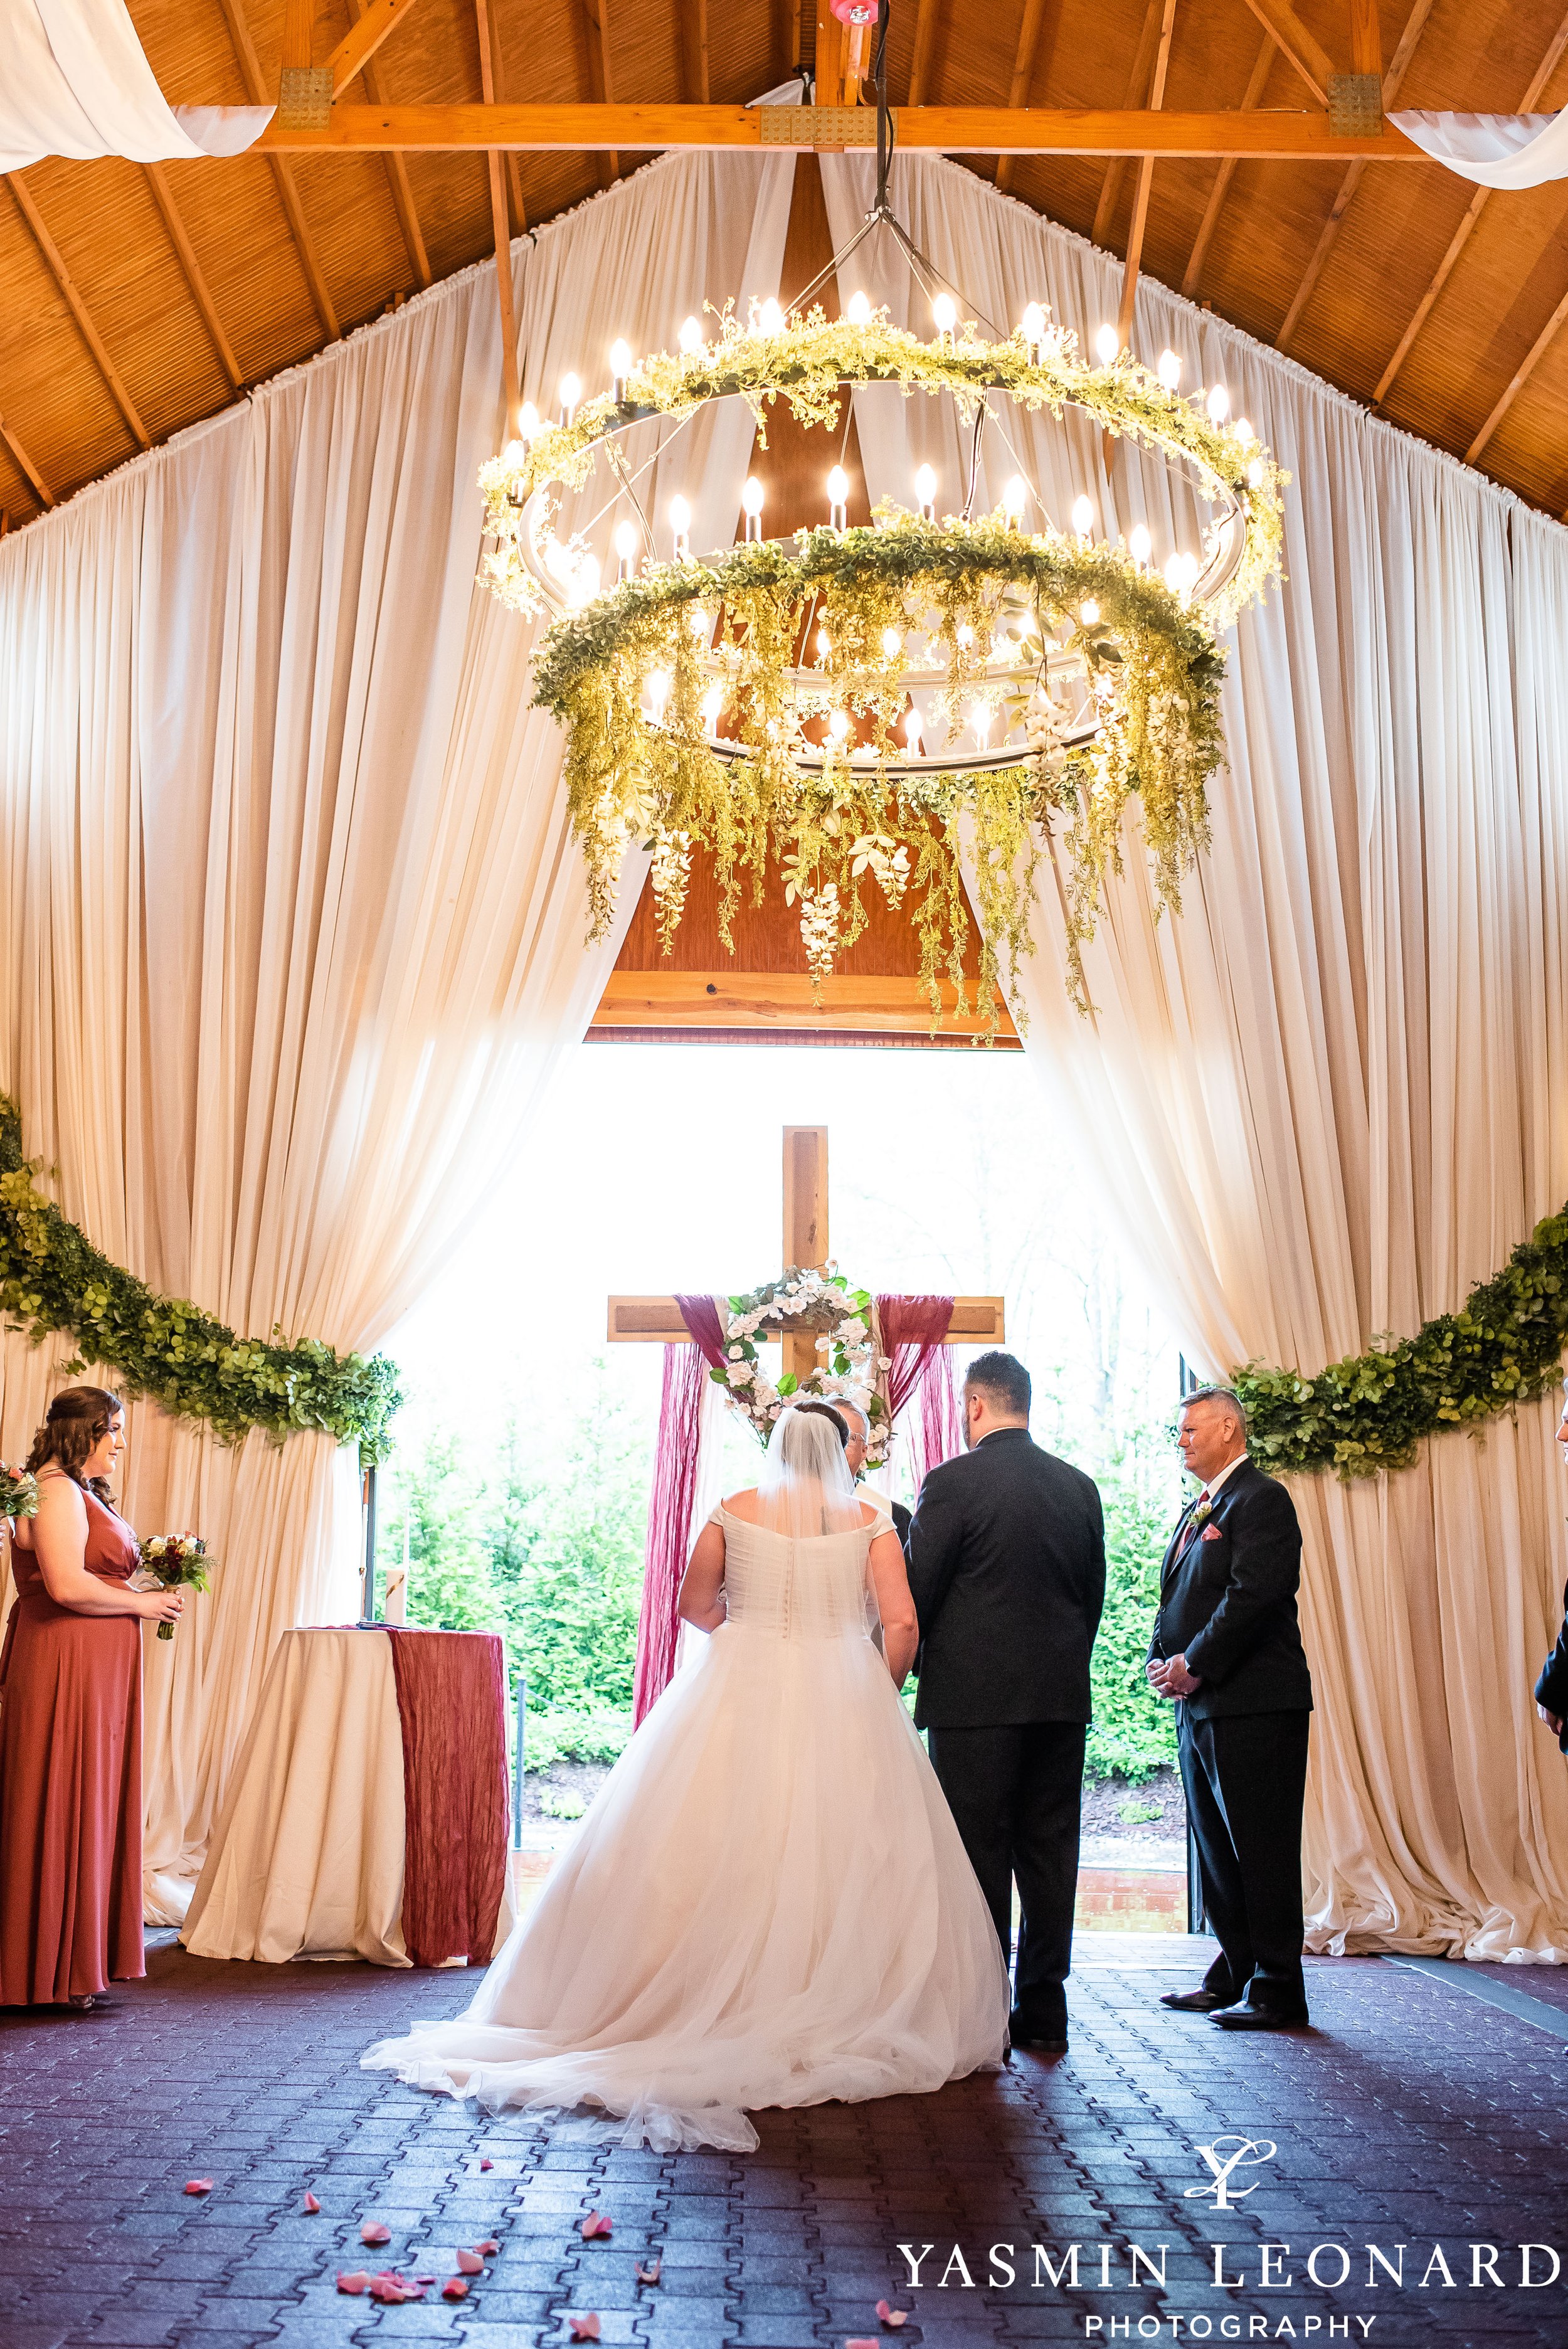 Legacy Stables and Events - Legacy Stables Wedding - Morgan and Logan - NC Weddings - Marry Me NC - Triad Weddings - Best Wedding Photographer Near Me - Best Photographer in High Point - Yasmin Leonard Photography-13.jpg